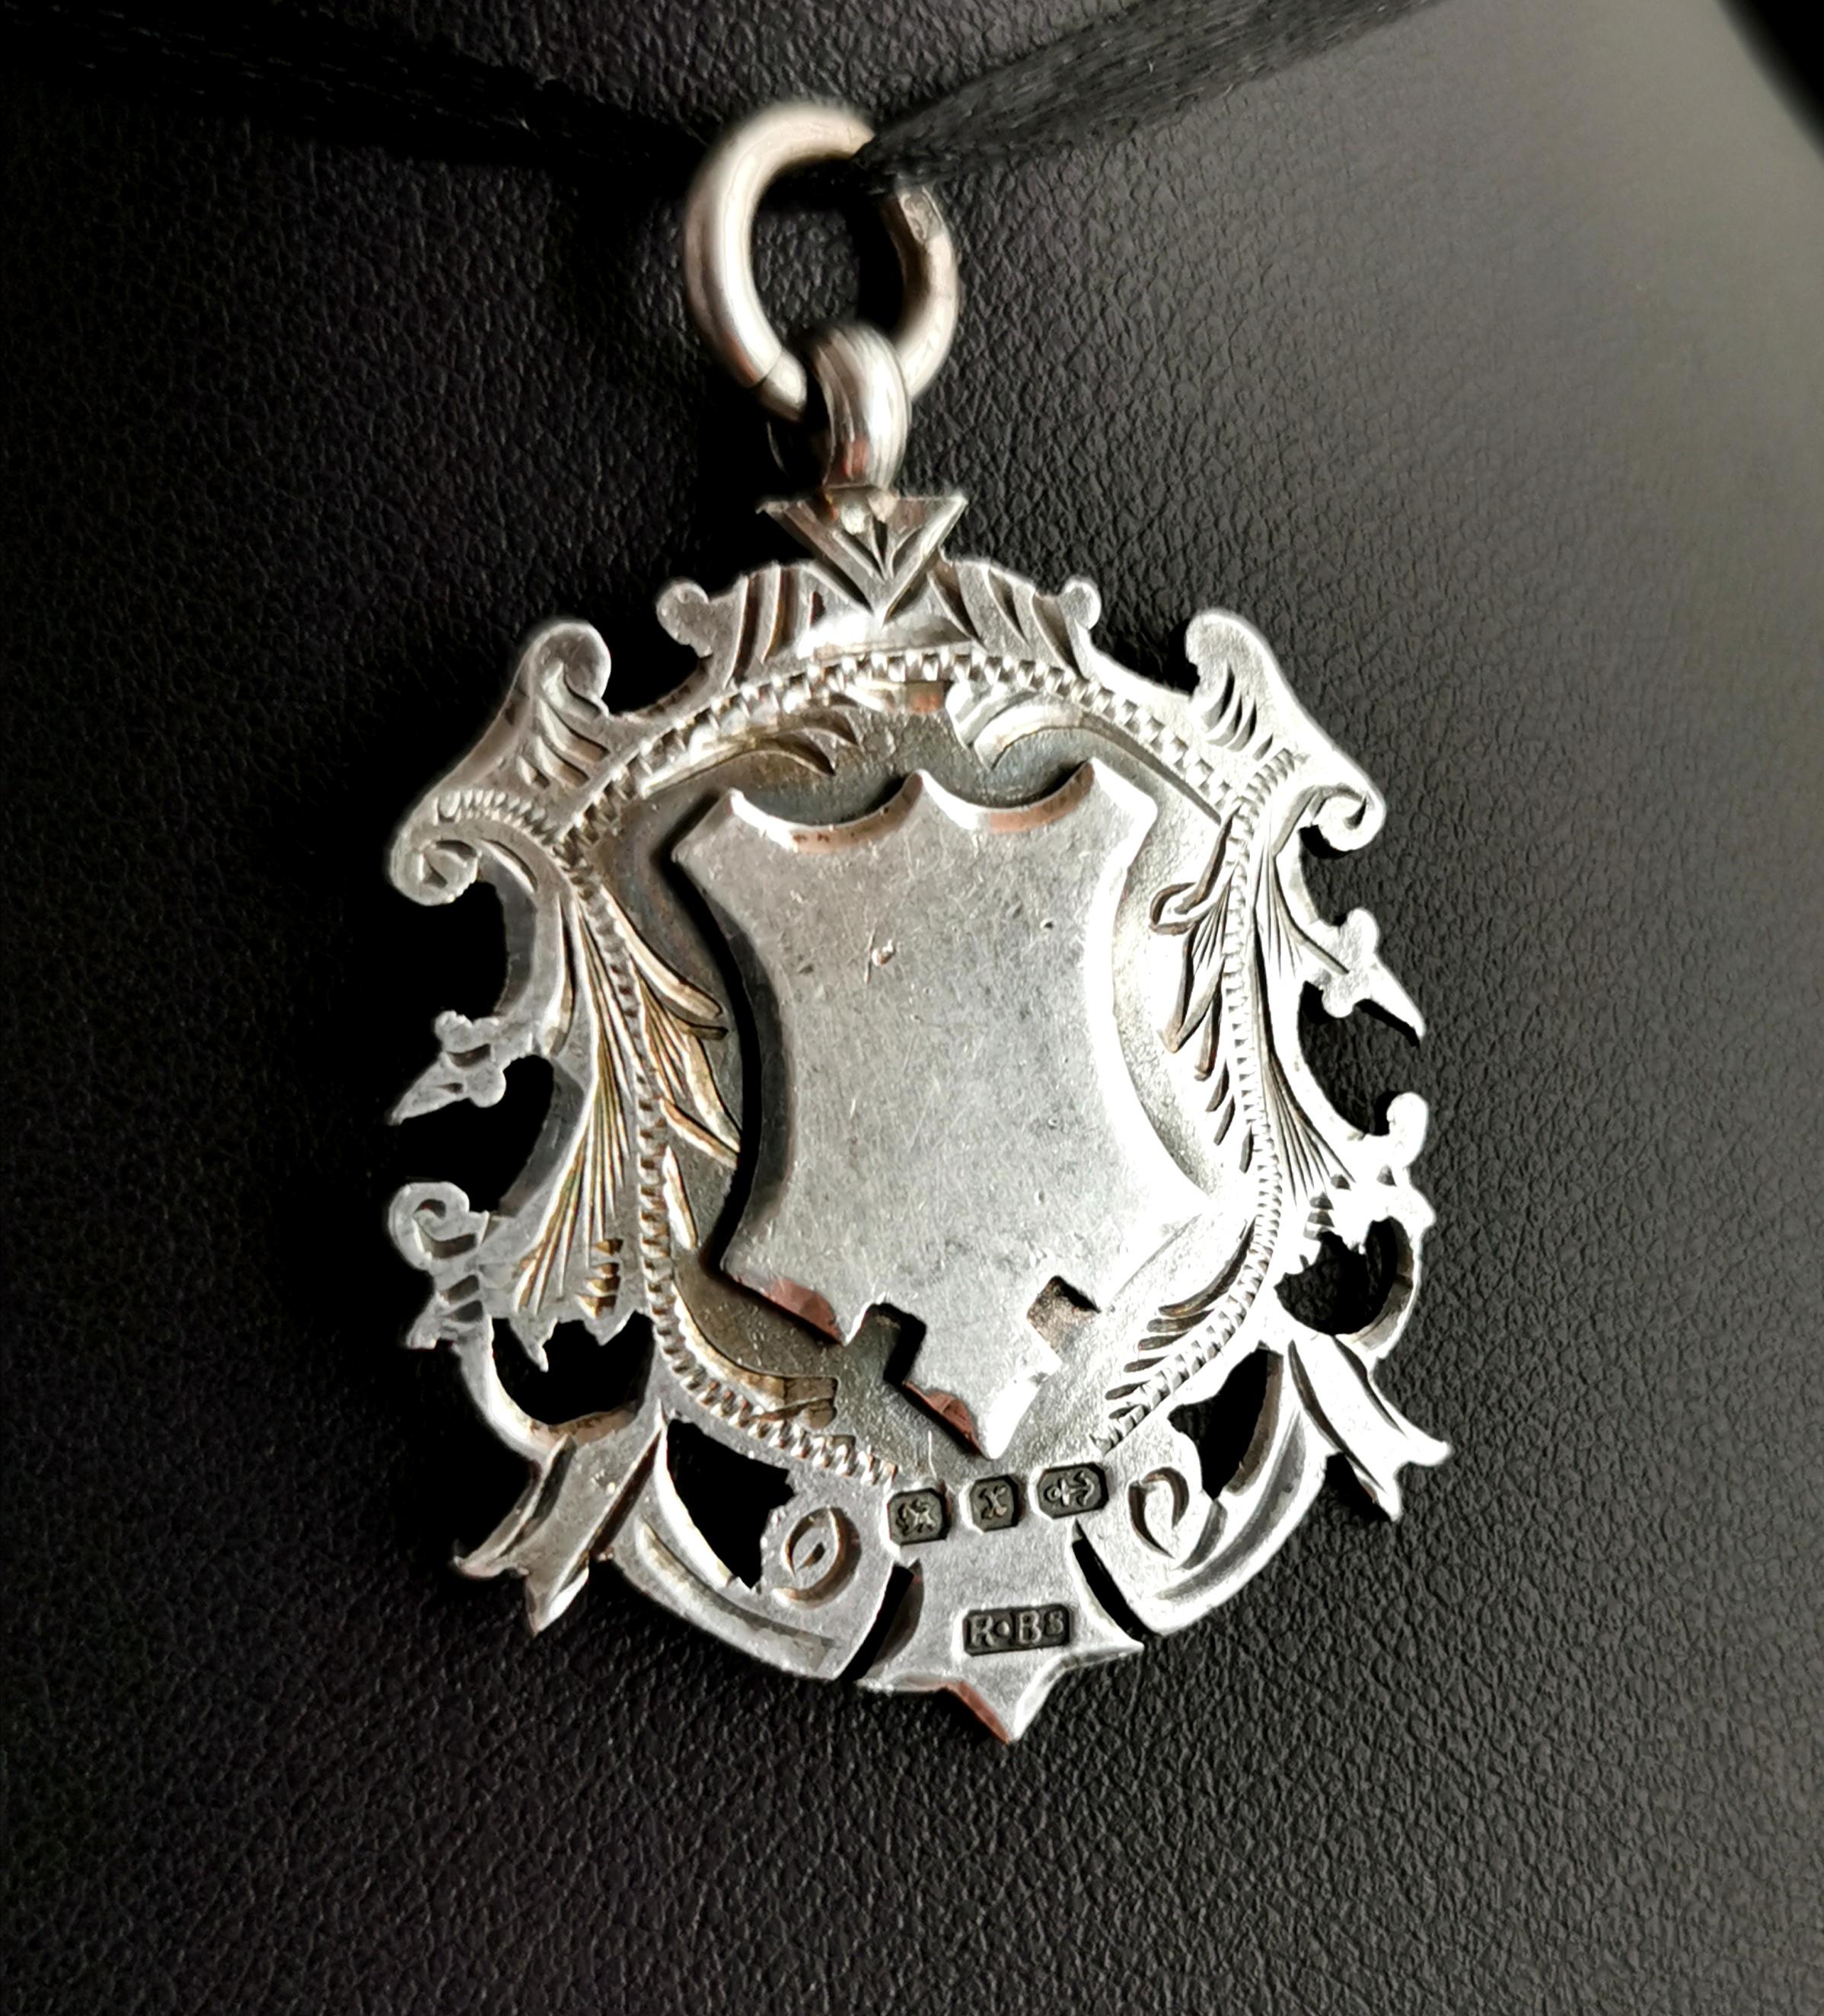 An attractive and elaborate antique sterling silver fob pendant.

A larger fob with a good weight to it, it is a shield shaped piece with a chased, engraved cut out border.

The fob has a large silver jump ring attached which is stamped with the